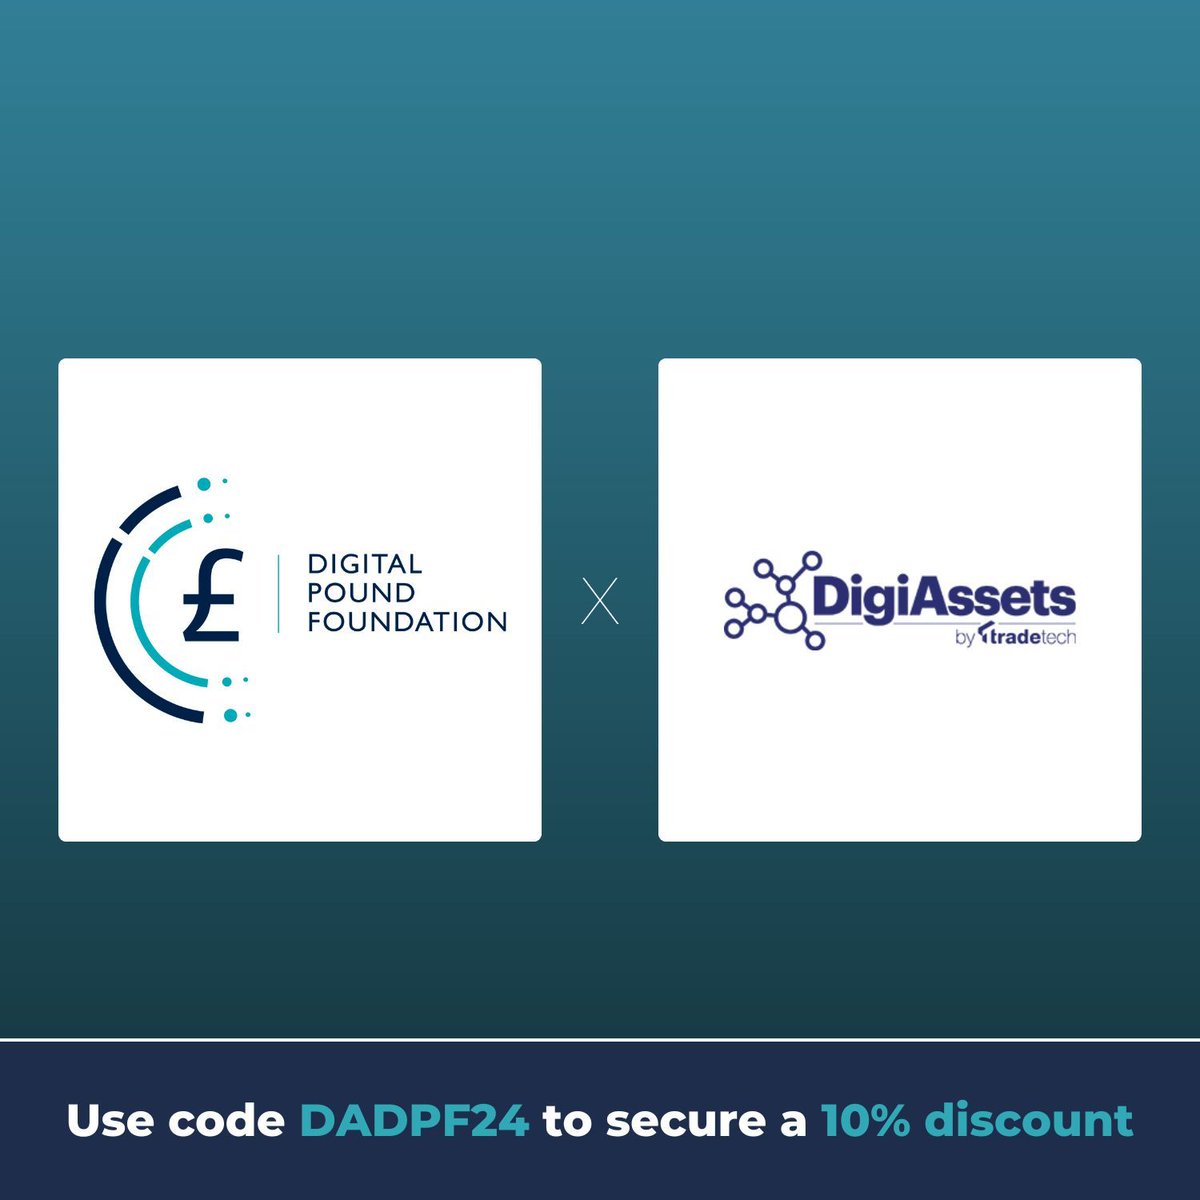 Have you booked your tickets yet for the #DigiAssets 2024 Conference on 14-15 May? Don't forget, you can save 10% when using the promo code 'DADPF24' 👉 buff.ly/4axWo00 ... #DigitalAssets #DigitalCurrencies #Fintech #Conference #Event #Discount #Promo | @TradeTech